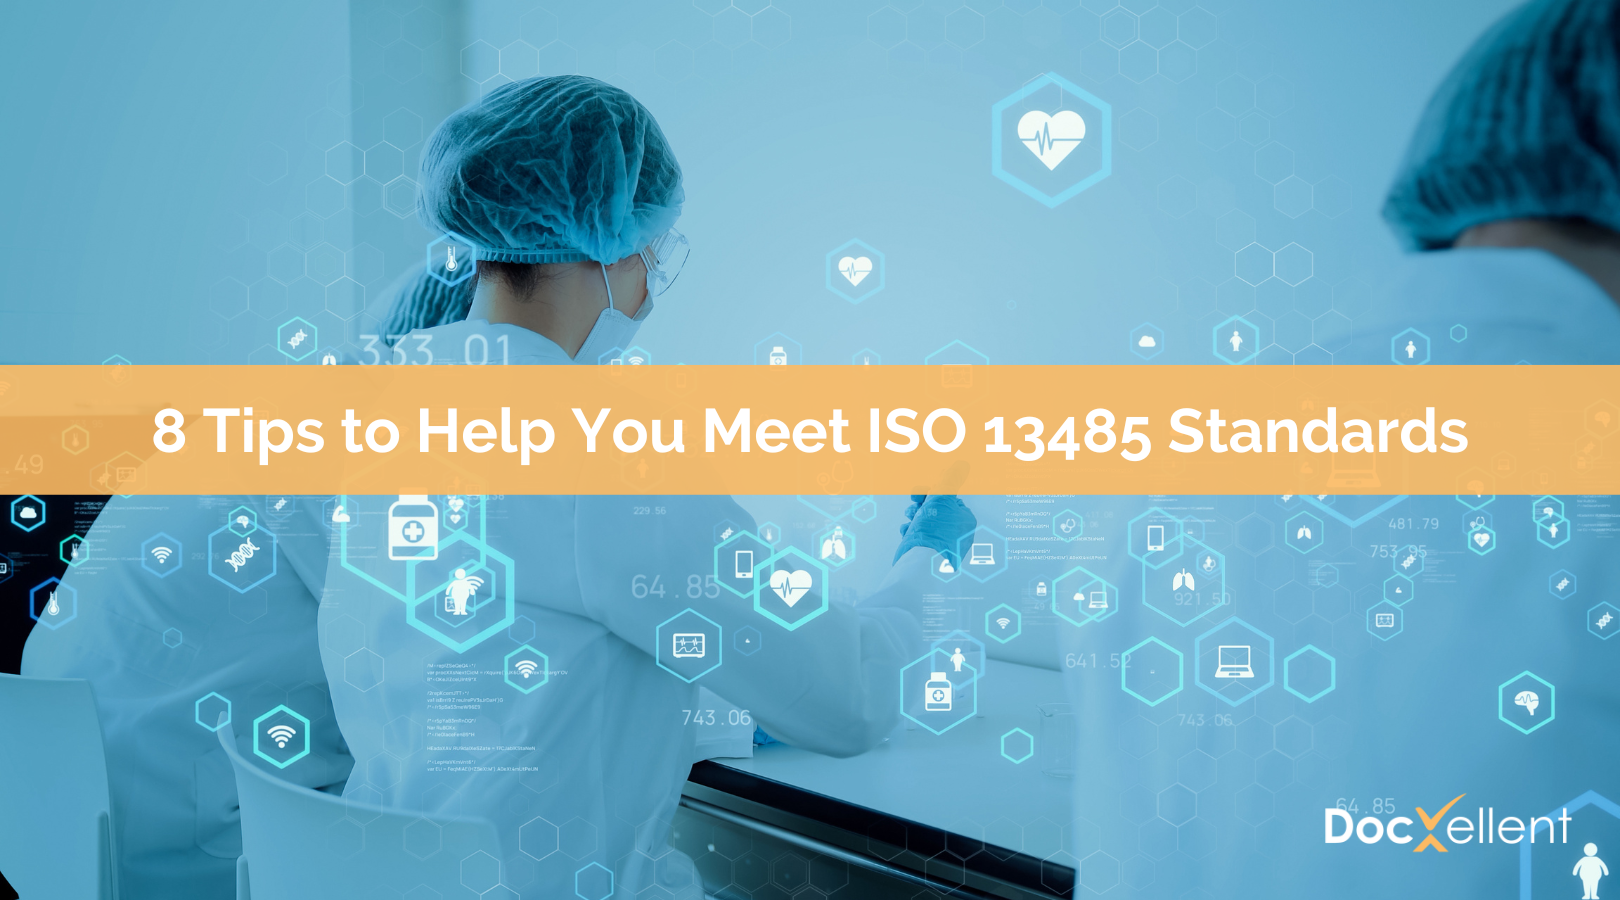 8 Tips to Help You Meet ISO 13485 Standards